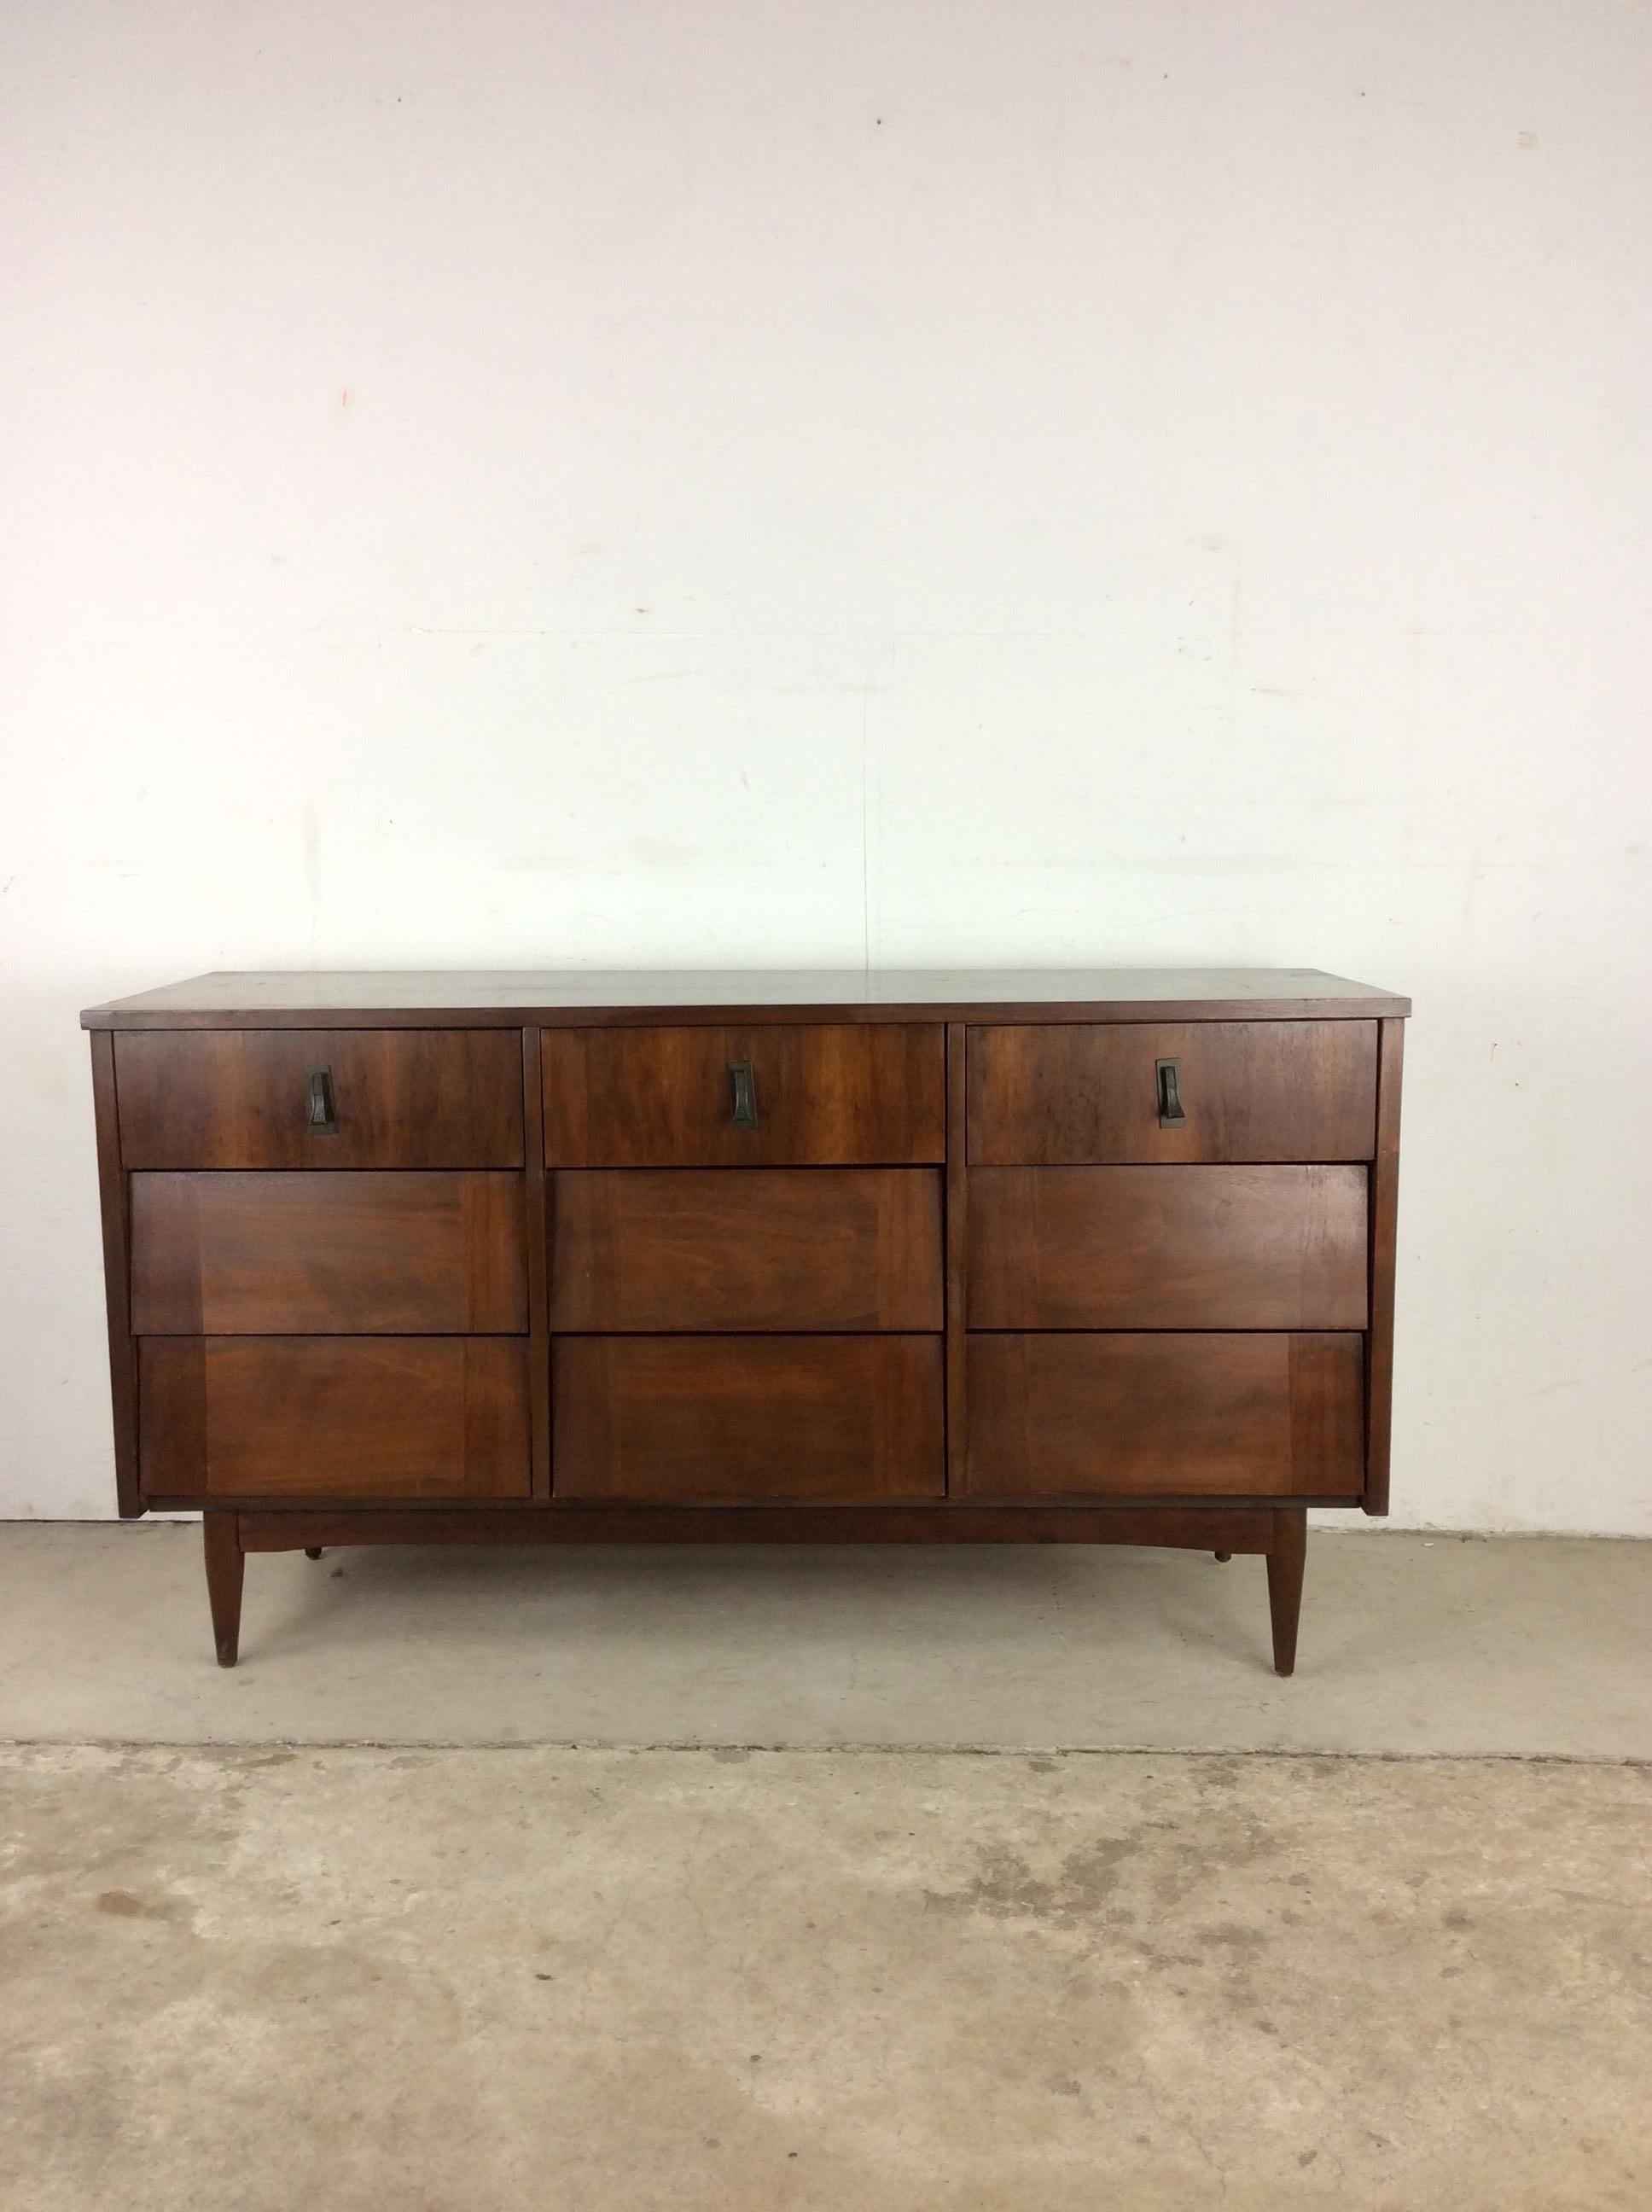 This Mid-Century Modern lowboy dresser features hardwood construction, original walnut finish, nine dovetailed drawers with louvered style drawer fronts, brass accented hardware, and tapered legs.
?Dimensions: 55.75w 17.75d 30.5h?


.